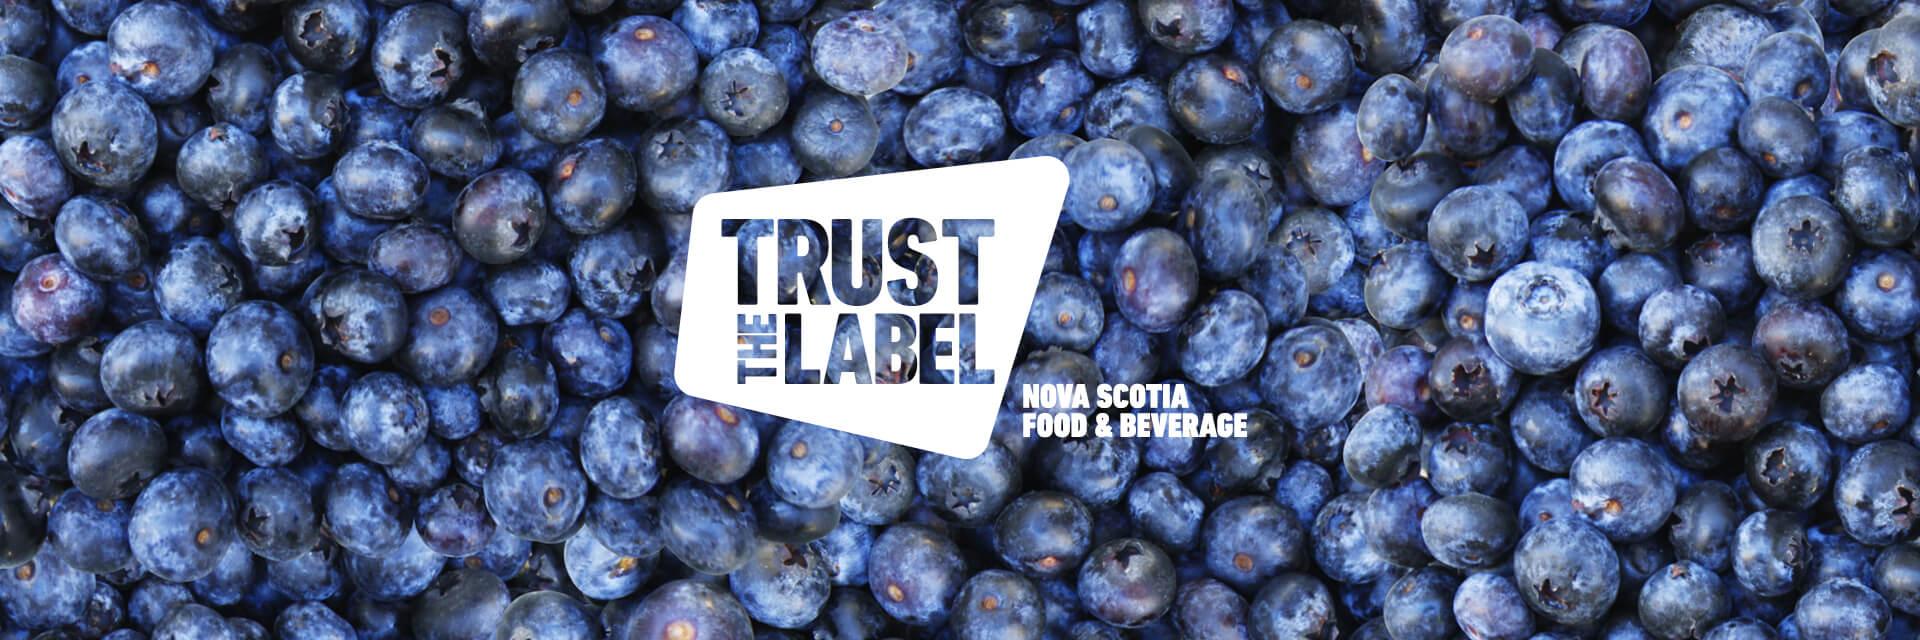 A 'Trust the Label' Nova Scotia Food and Beverage logo overlaid on a photo of blueberries.